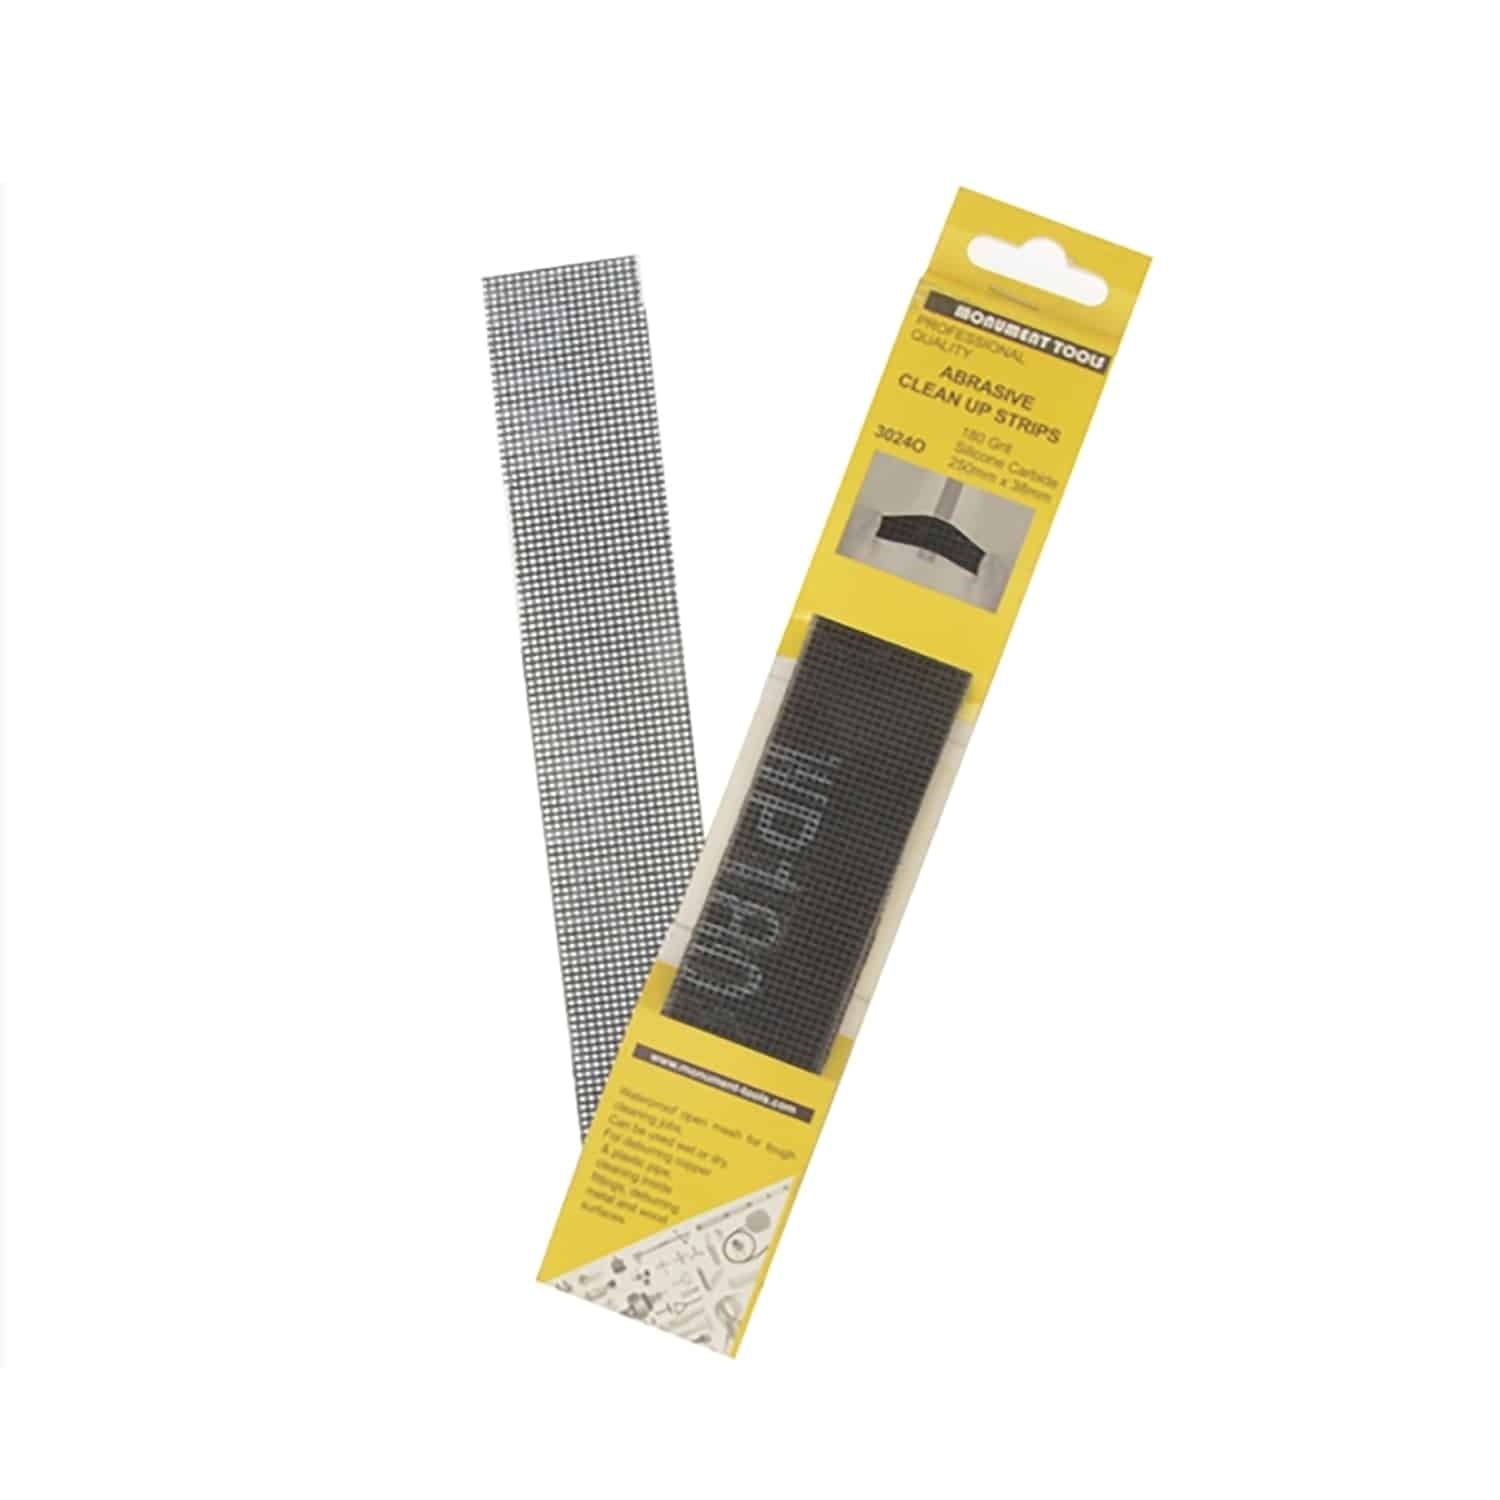 Monument Abrasive Clean Up Strips Pack of 10 | UK Plumbing